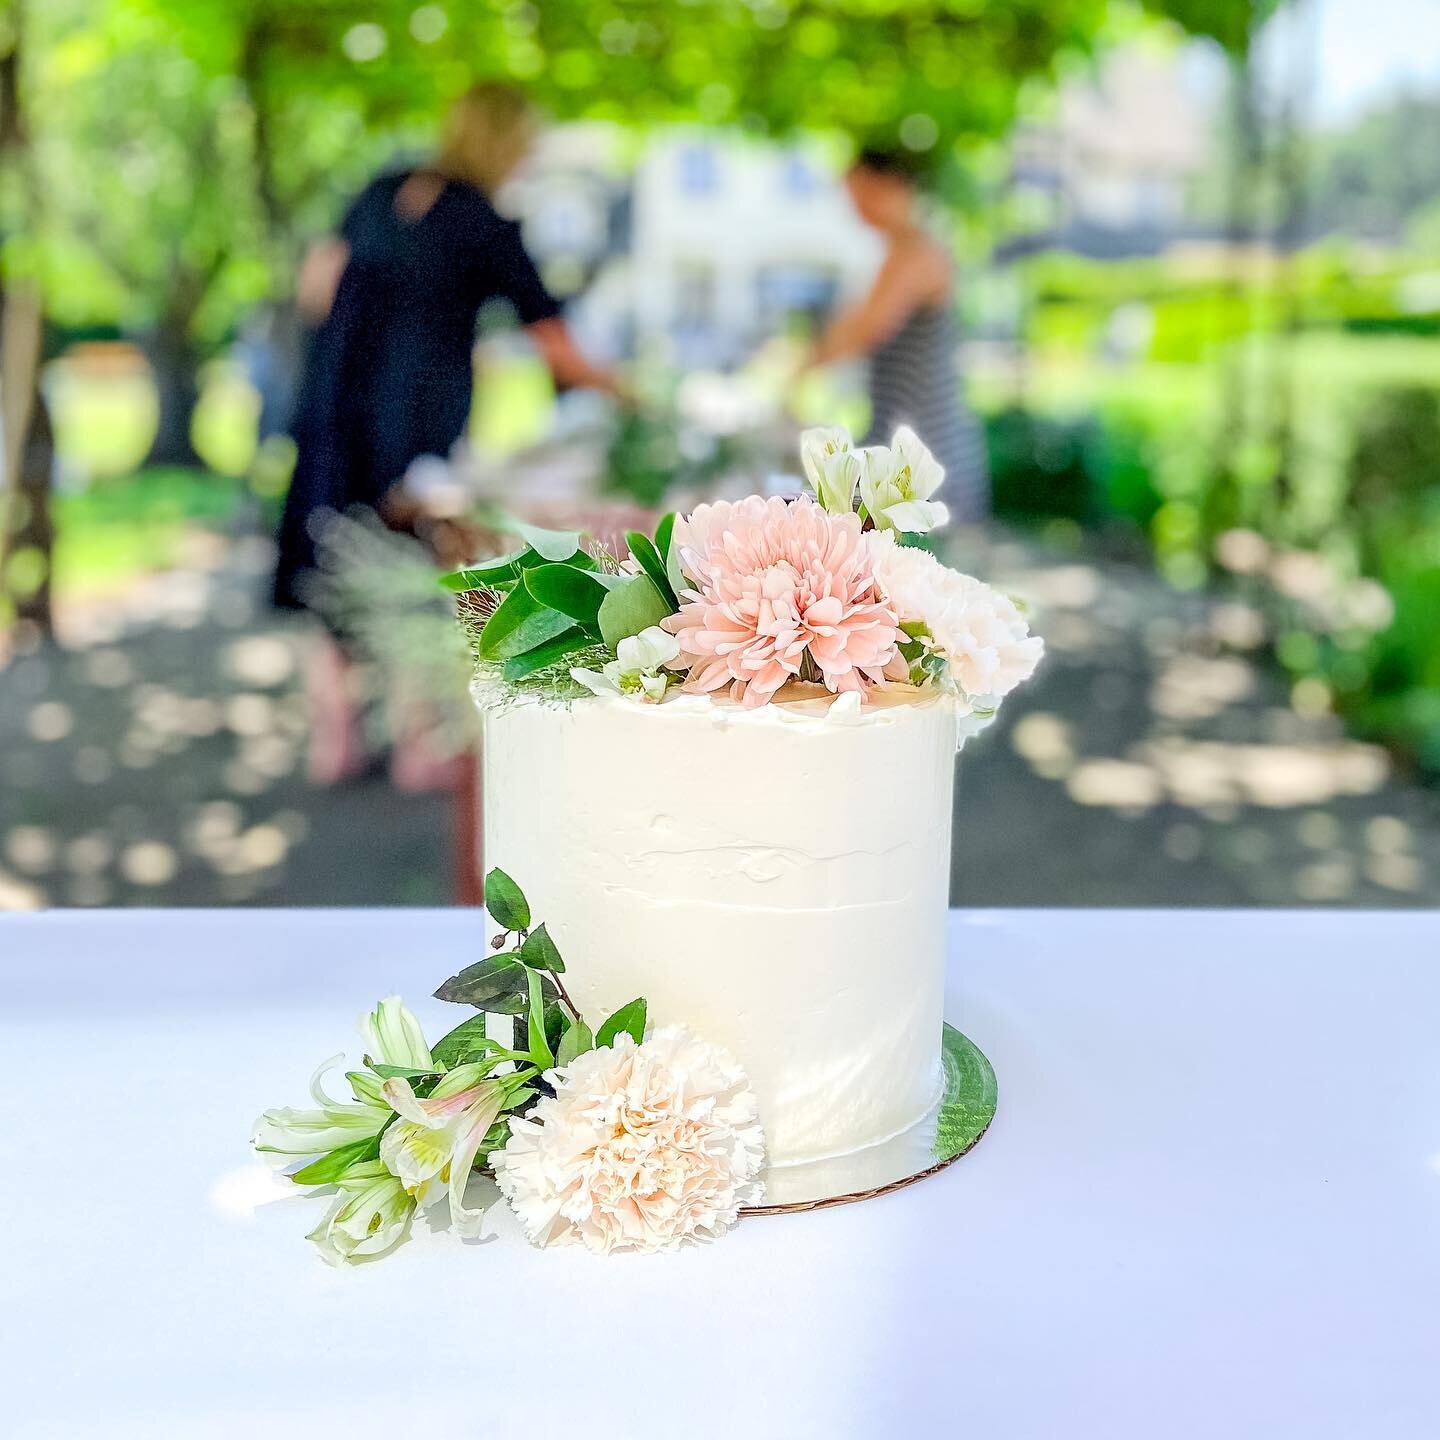 A sweet little cutting cake to pair with mini tarts for the guests 💙

Venue: @beaconhillwines 
Coordinator: @gatherevents 
Catering: @pearlcateringpdx